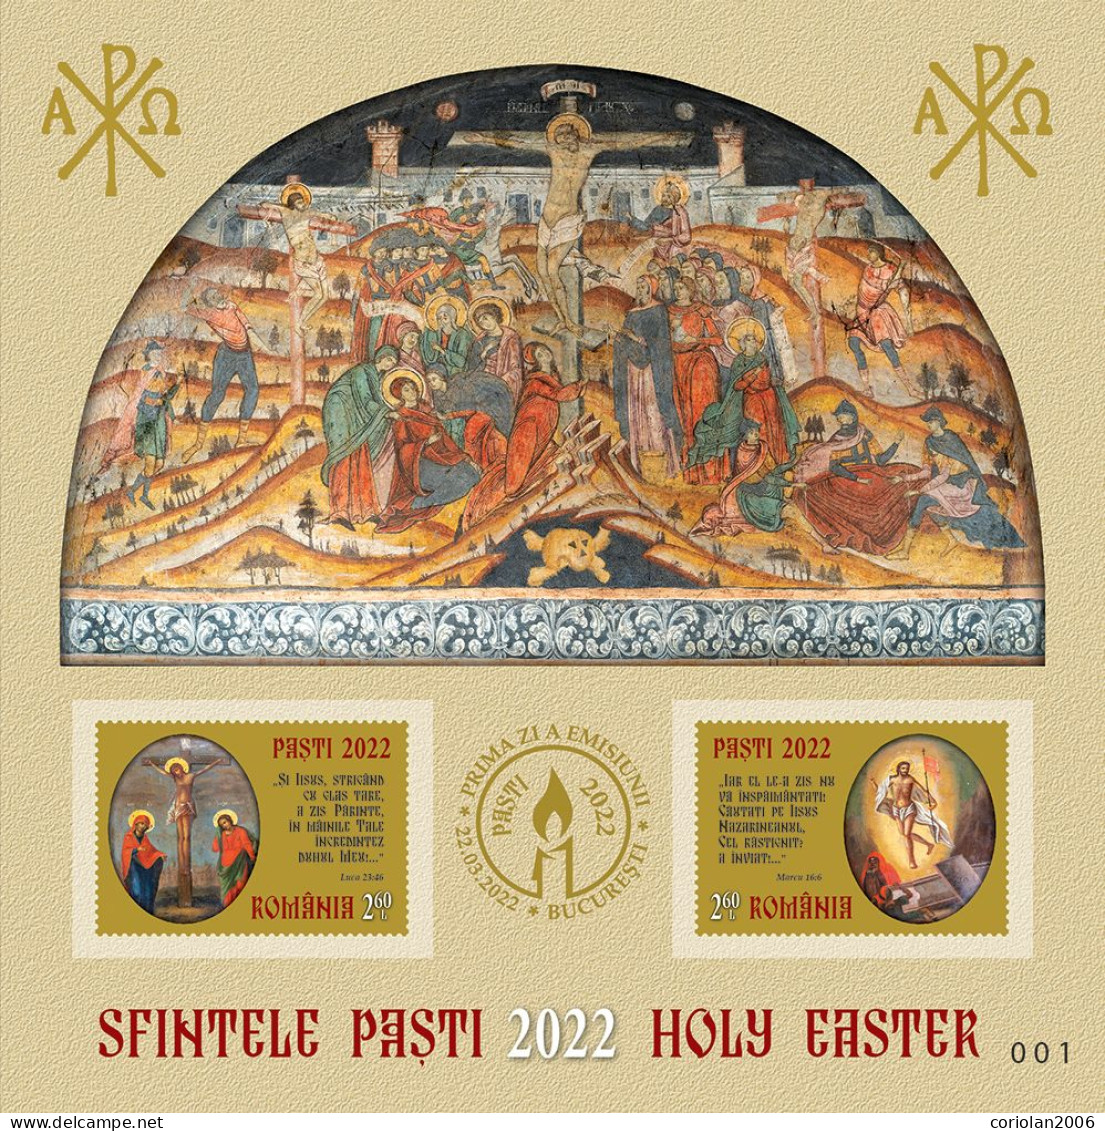 Romania 2022 / Easter / SPECIAL CARDBOARDwith Gold Folio Stamp - Easter